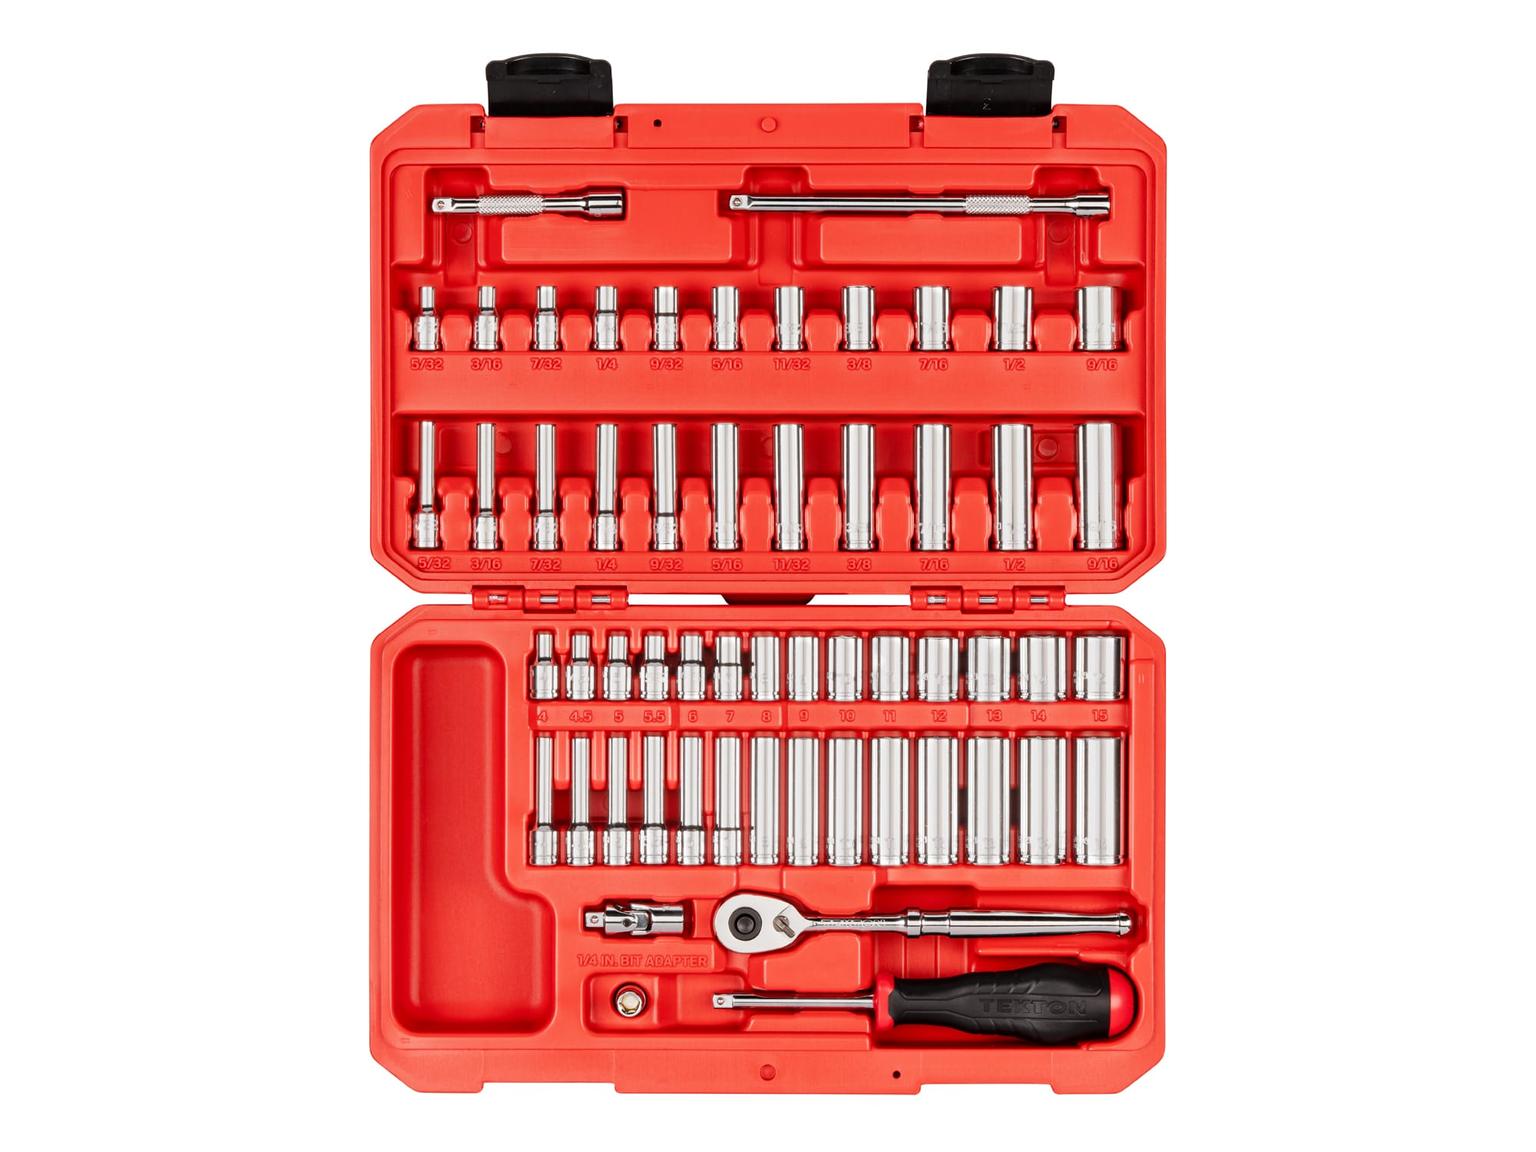 TEKTON SKT05304-D 1/4 Inch Drive 12-Point Socket and Ratchet Set, 56-Piece (5/32 - 9/16 in., 4 - 15 mm)